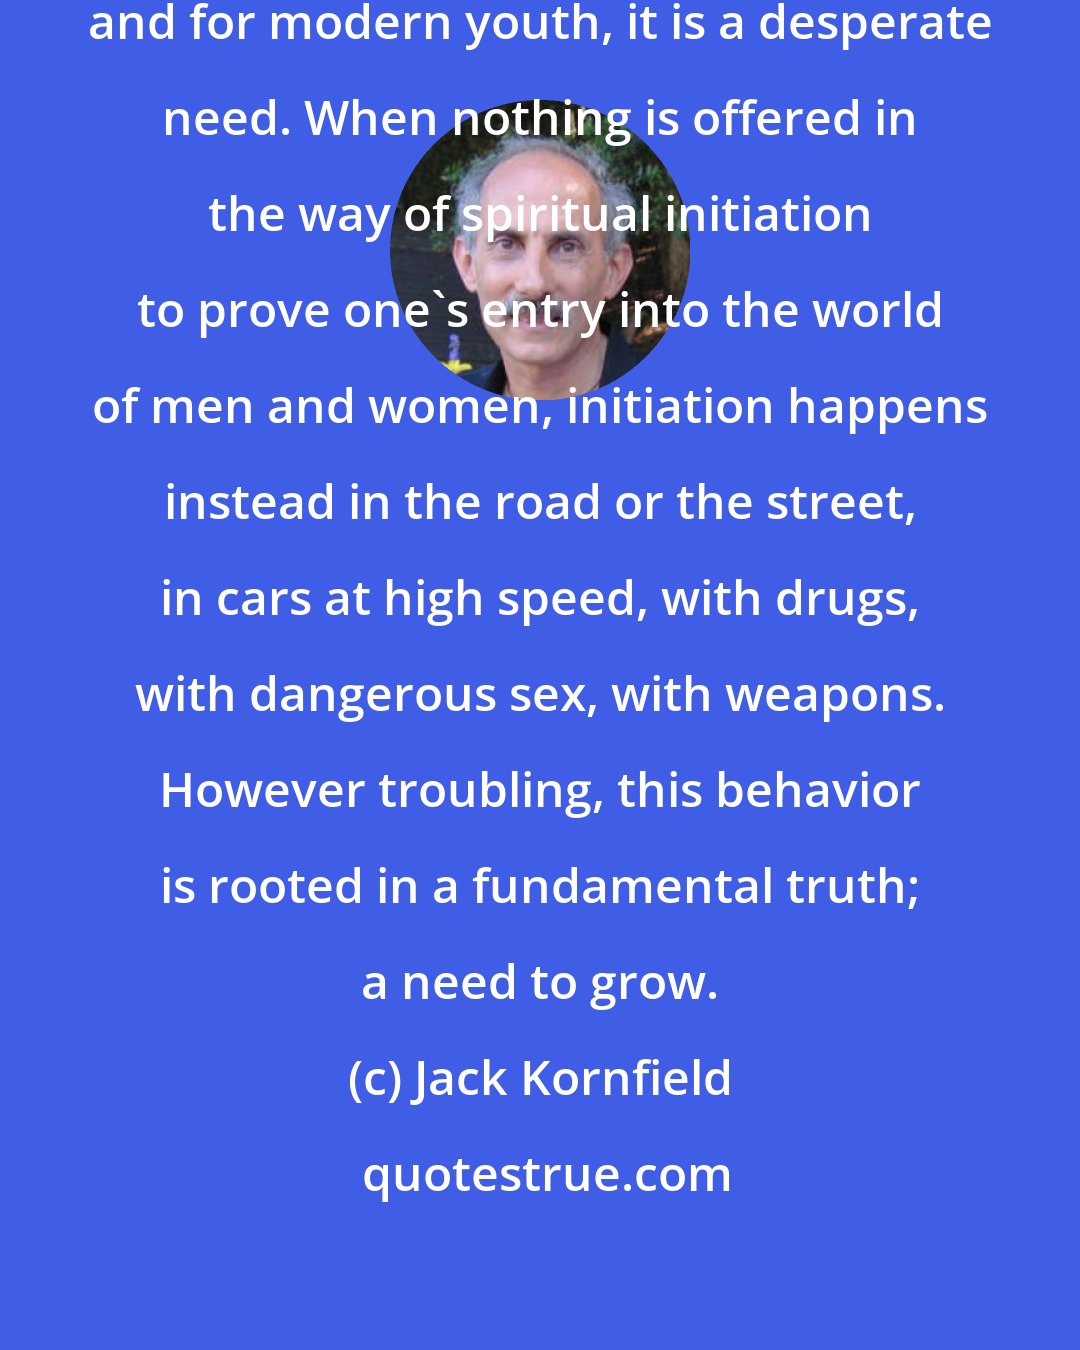 Jack Kornfield: The longing for initiation is universal and for modern youth, it is a desperate need. When nothing is offered in the way of spiritual initiation to prove one's entry into the world of men and women, initiation happens instead in the road or the street, in cars at high speed, with drugs, with dangerous sex, with weapons. However troubling, this behavior is rooted in a fundamental truth; a need to grow.